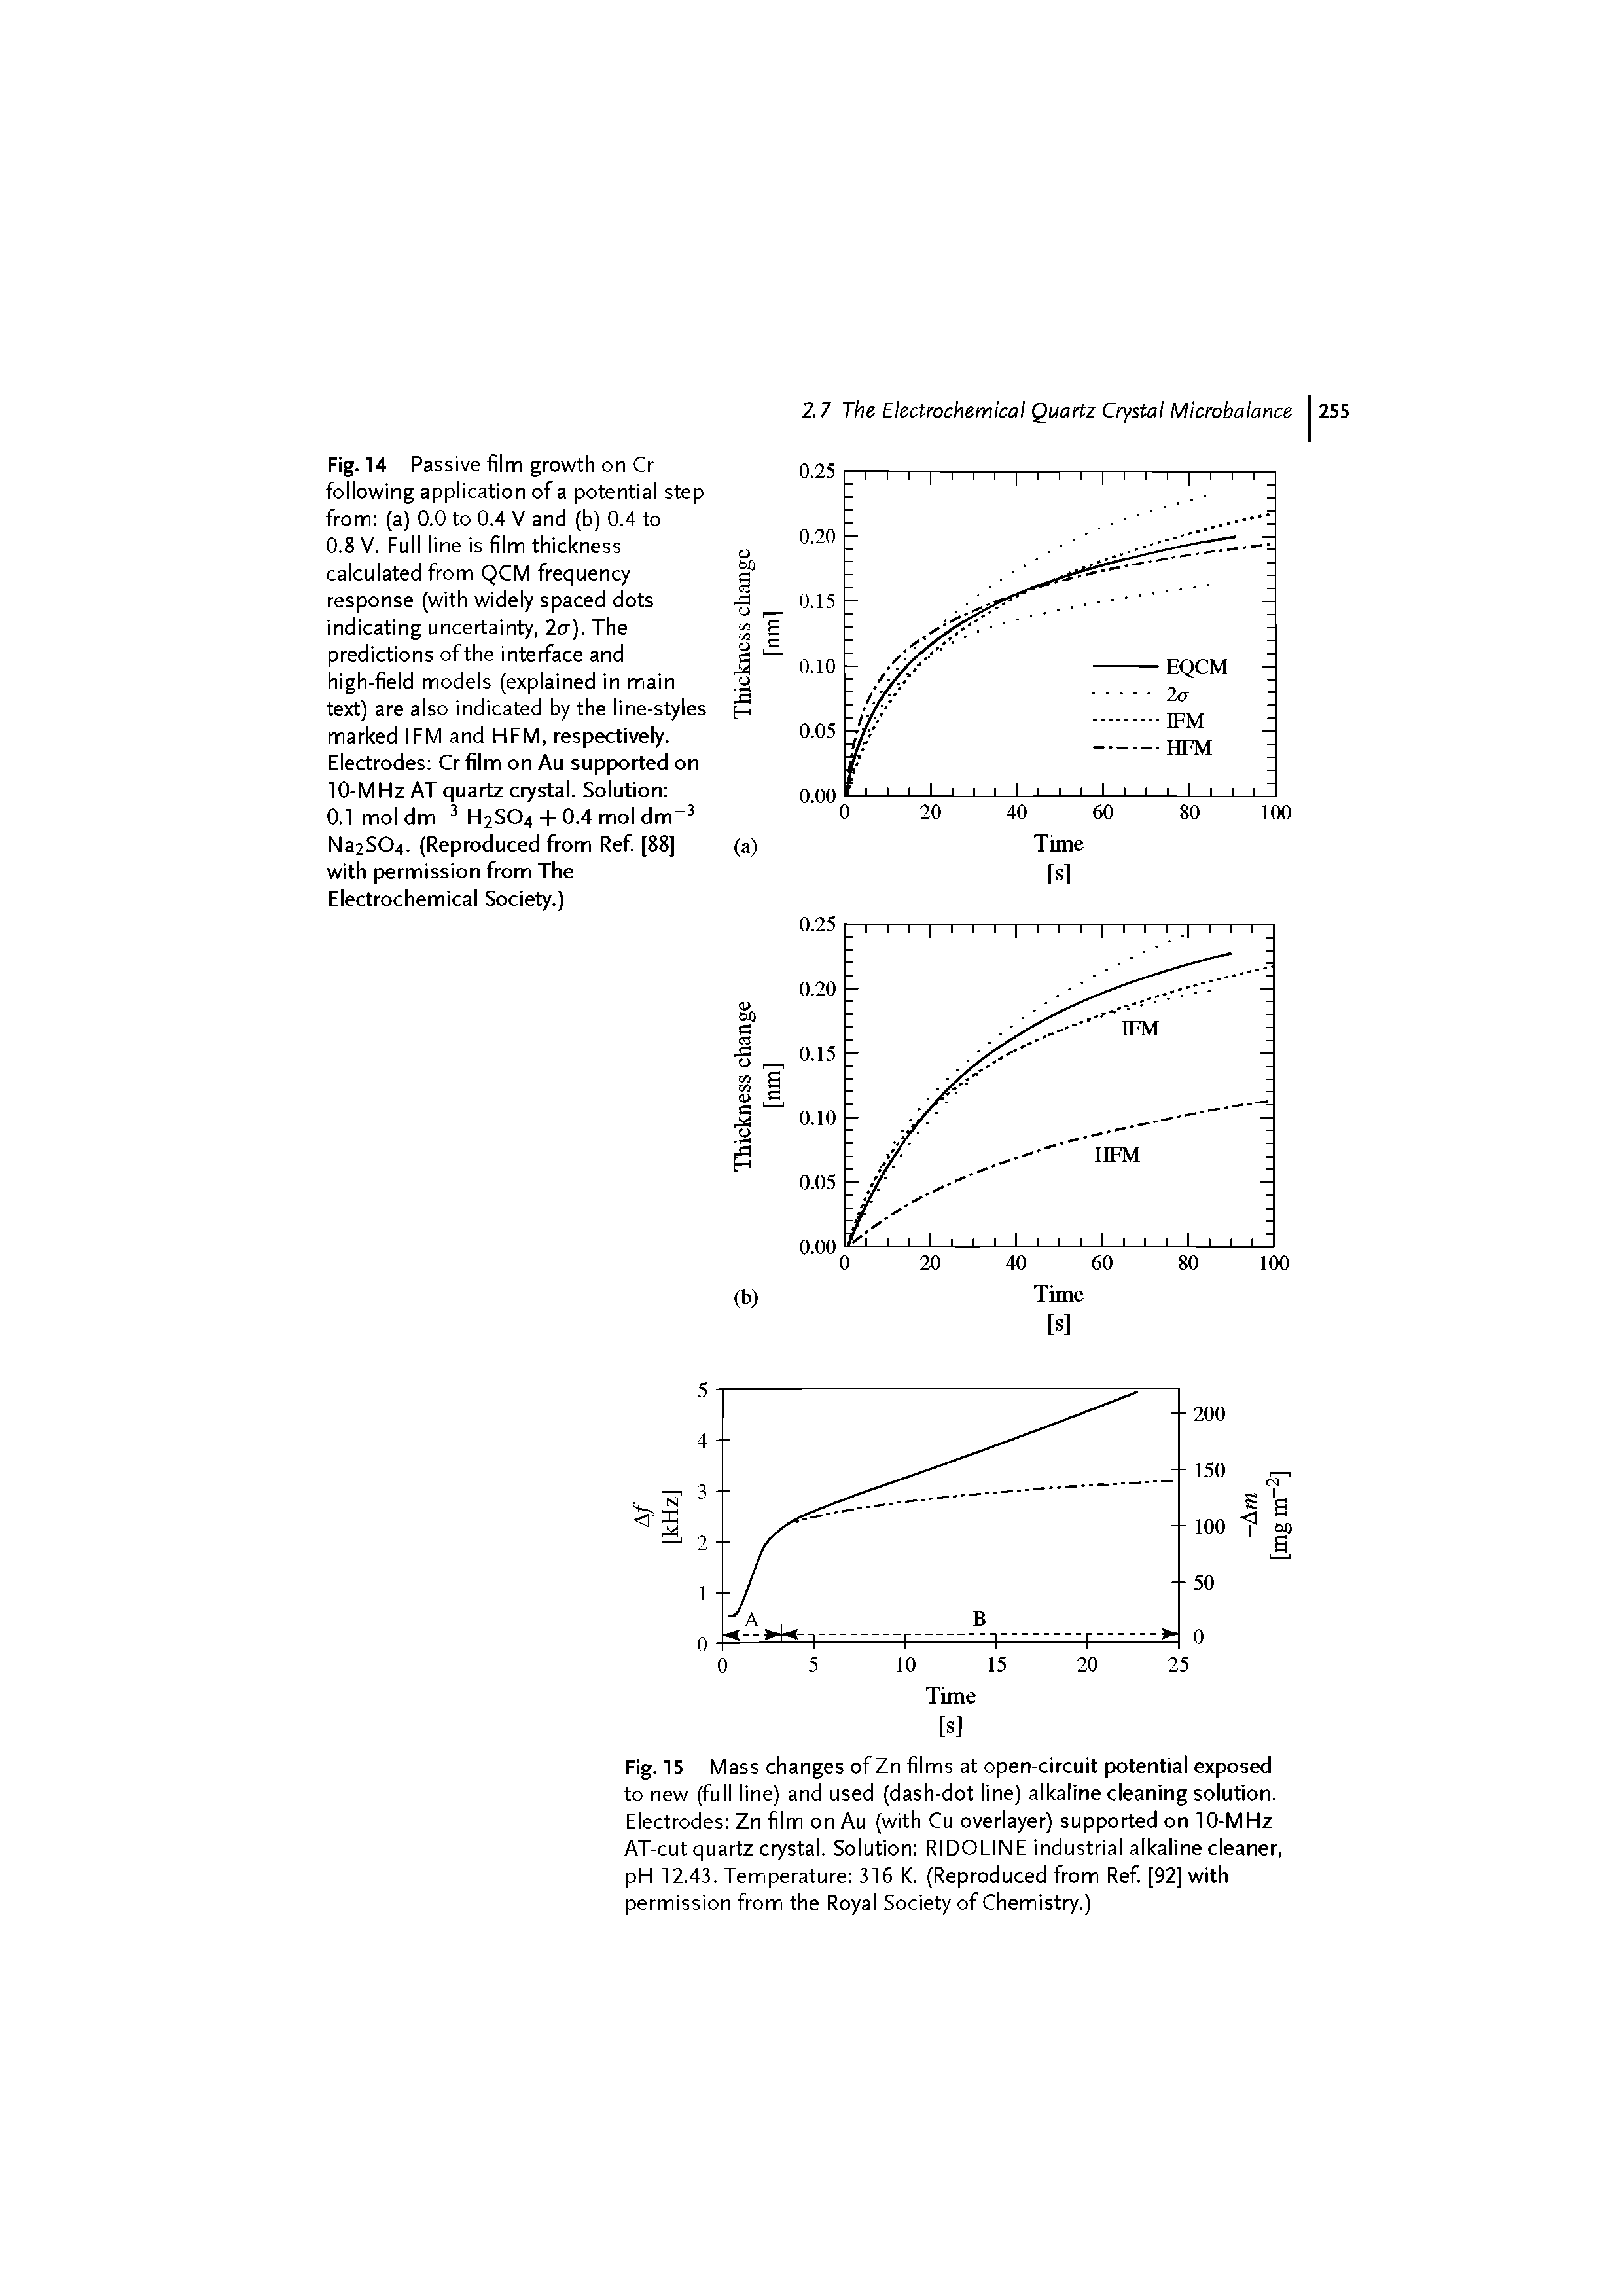 Fig. 15 Mass changes of Zn films at open-circuit potential exposed to new (full line) and used (dash-dot line) alkaline cleaning solution. Electrodes Zn film on Au (with Cu overlayer) supported on 10-MHz AT-cut quartz crystal. Solution RIDOLINE industrial alkaline cleaner, pH 12.43. Temperature 316 K. (Reproduced from Ref [92] with permission from the Royal Society of Chemistry.)...